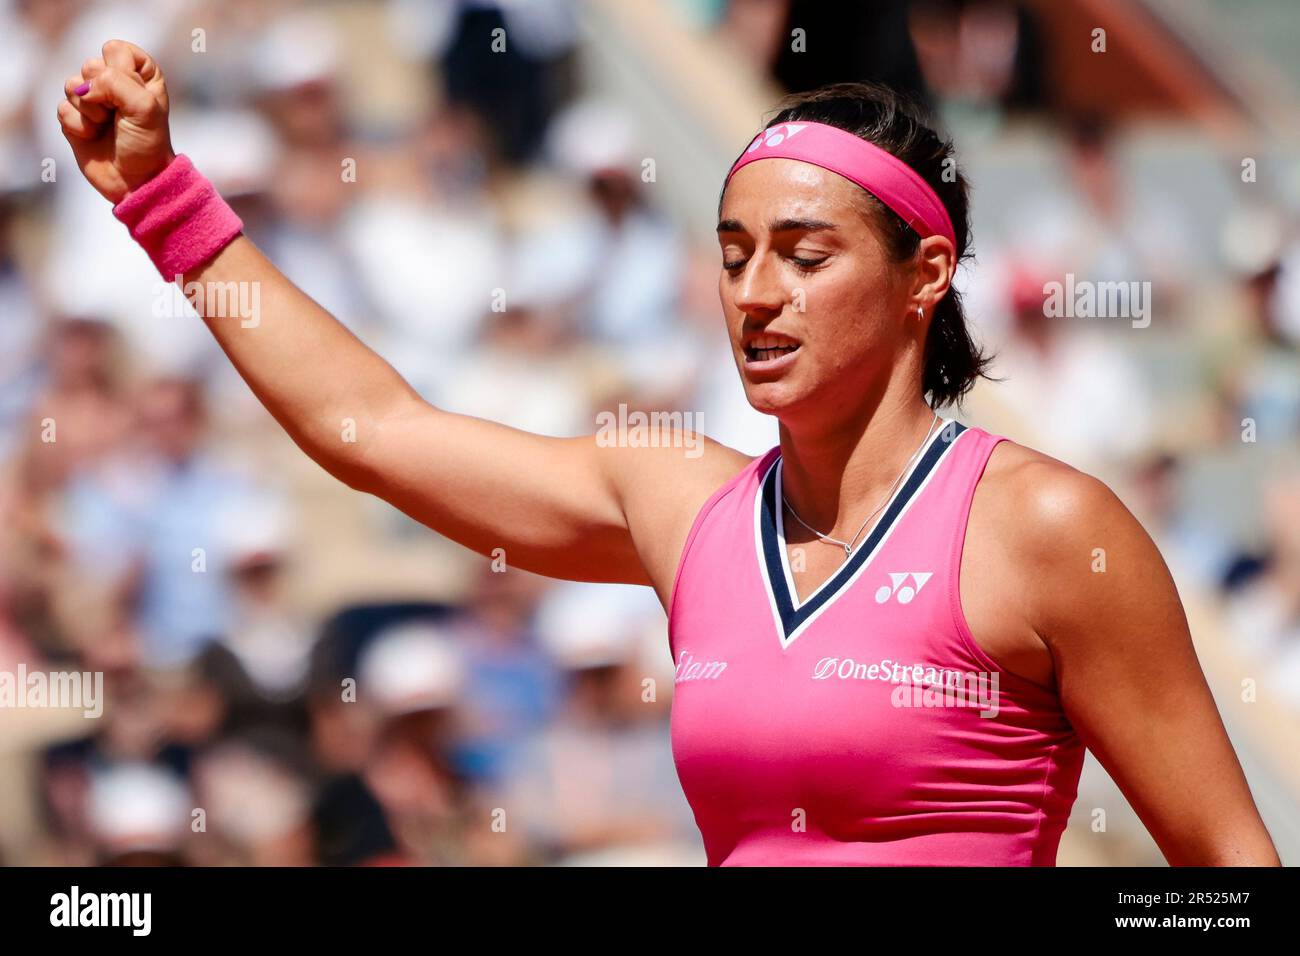 Paris, France. 31st May, 2023. Tennis player Caroline Garcia (France) is in action at the 2023 French Open Grand Slam tennis tournament in Roland Garros, Paris, France. Frank Molter/Alamy Live news Stock Photo